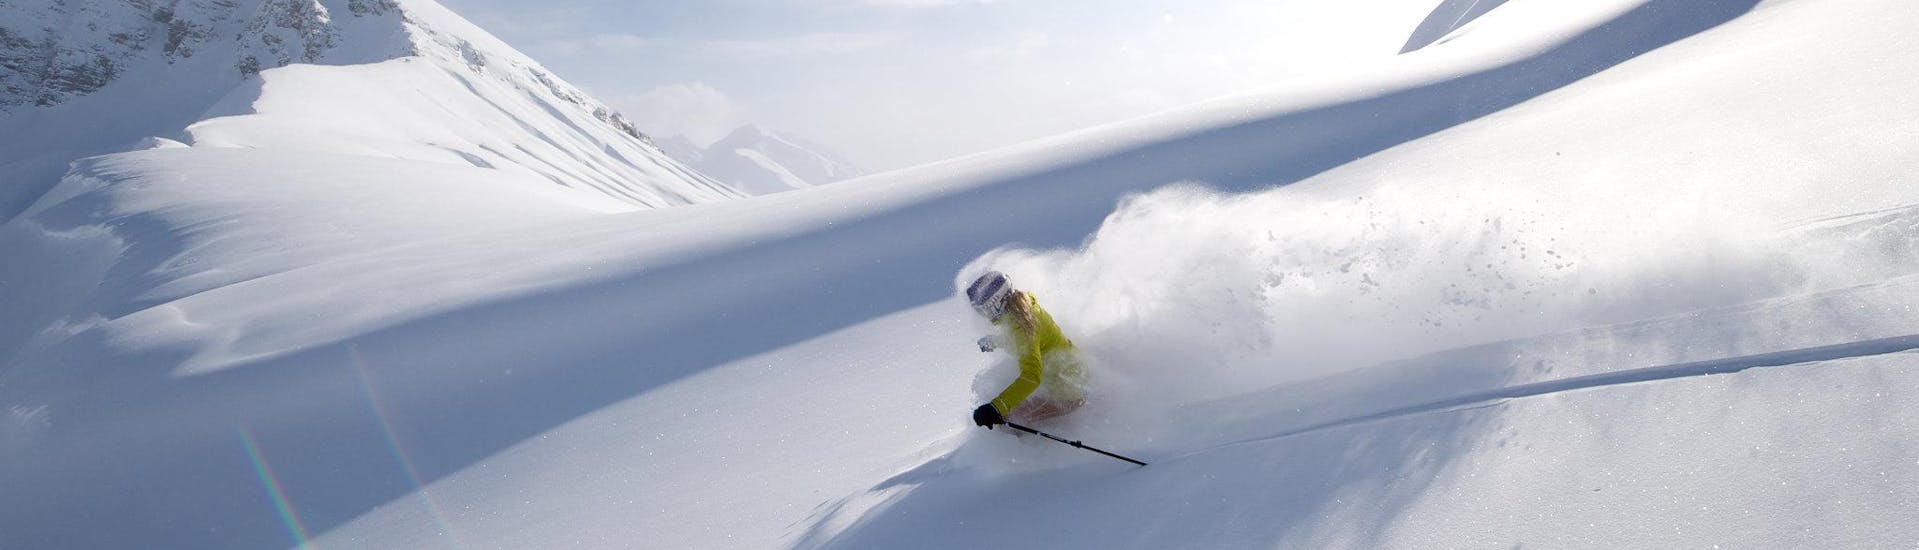 A skier is making his way down a deep powder snow slope during his off piste skiing lessons in Fieberbrunn.